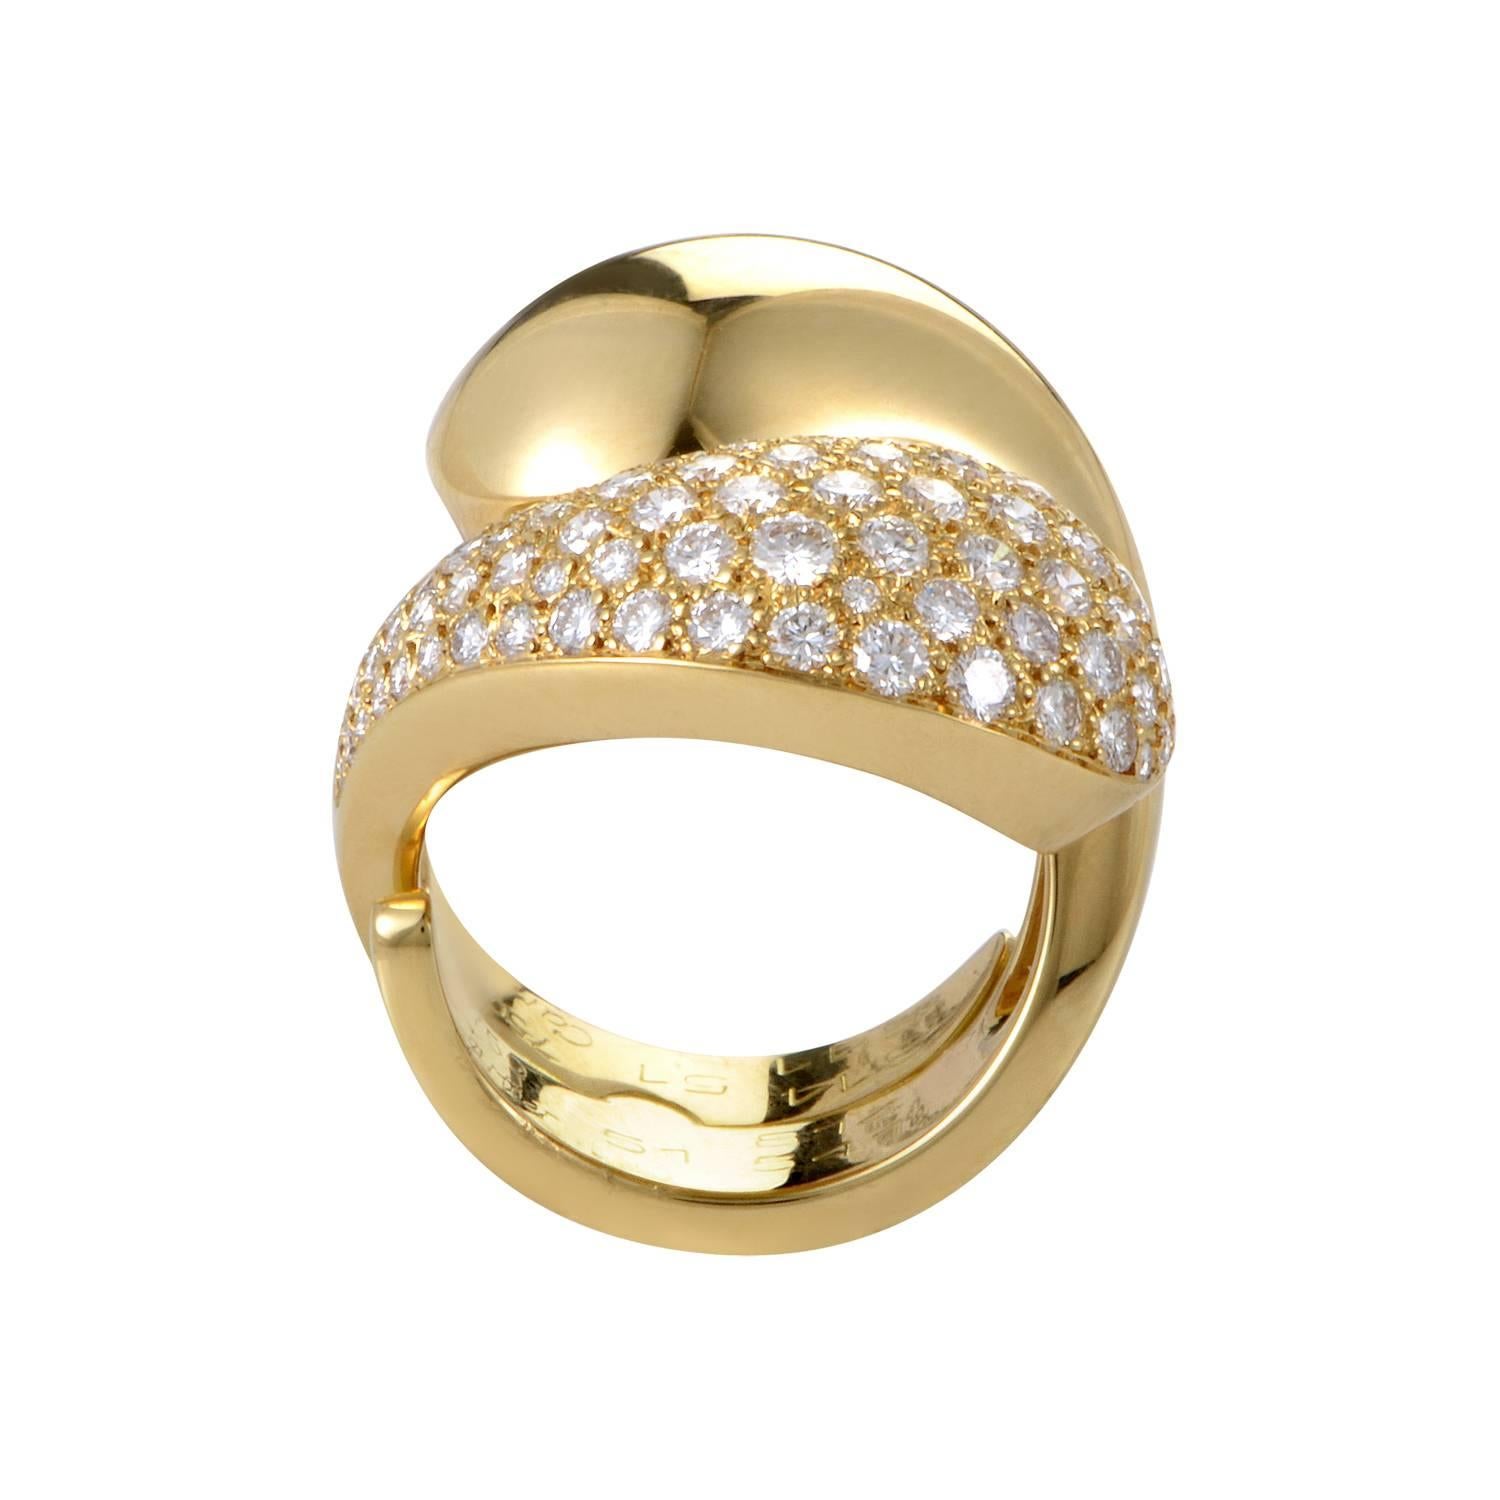 Like embracing tears this Cartier ring spins and folds until its bold swells nestle together at its peak with yin-yang intimacy. One half resonates with pure 18K yellow gold integrity, while the other boasts the added sparkle of meticulously set